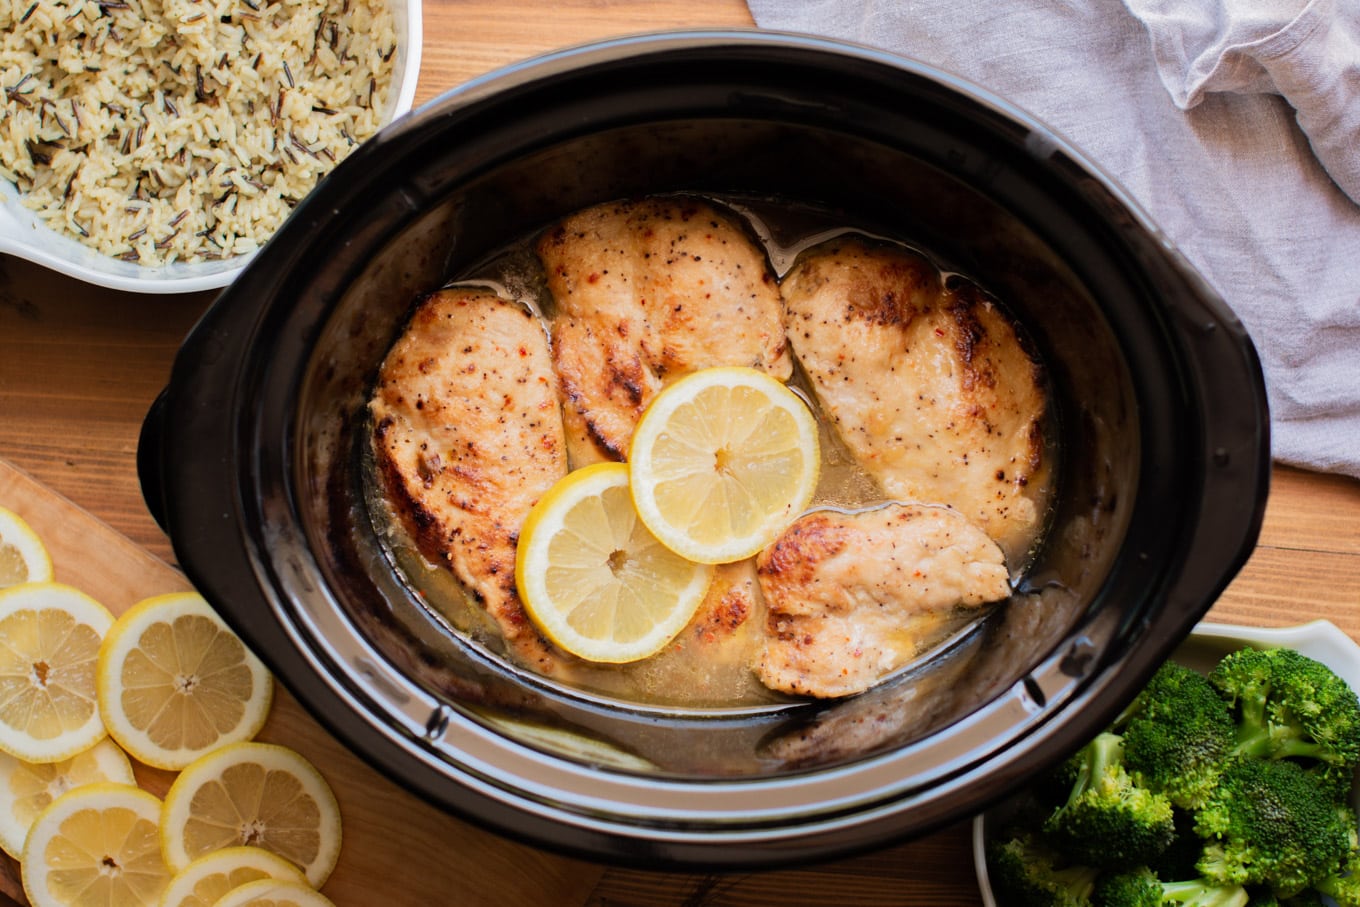 Finished cooking lemon chicken in a slow cooker with broccoli and rice on the side.